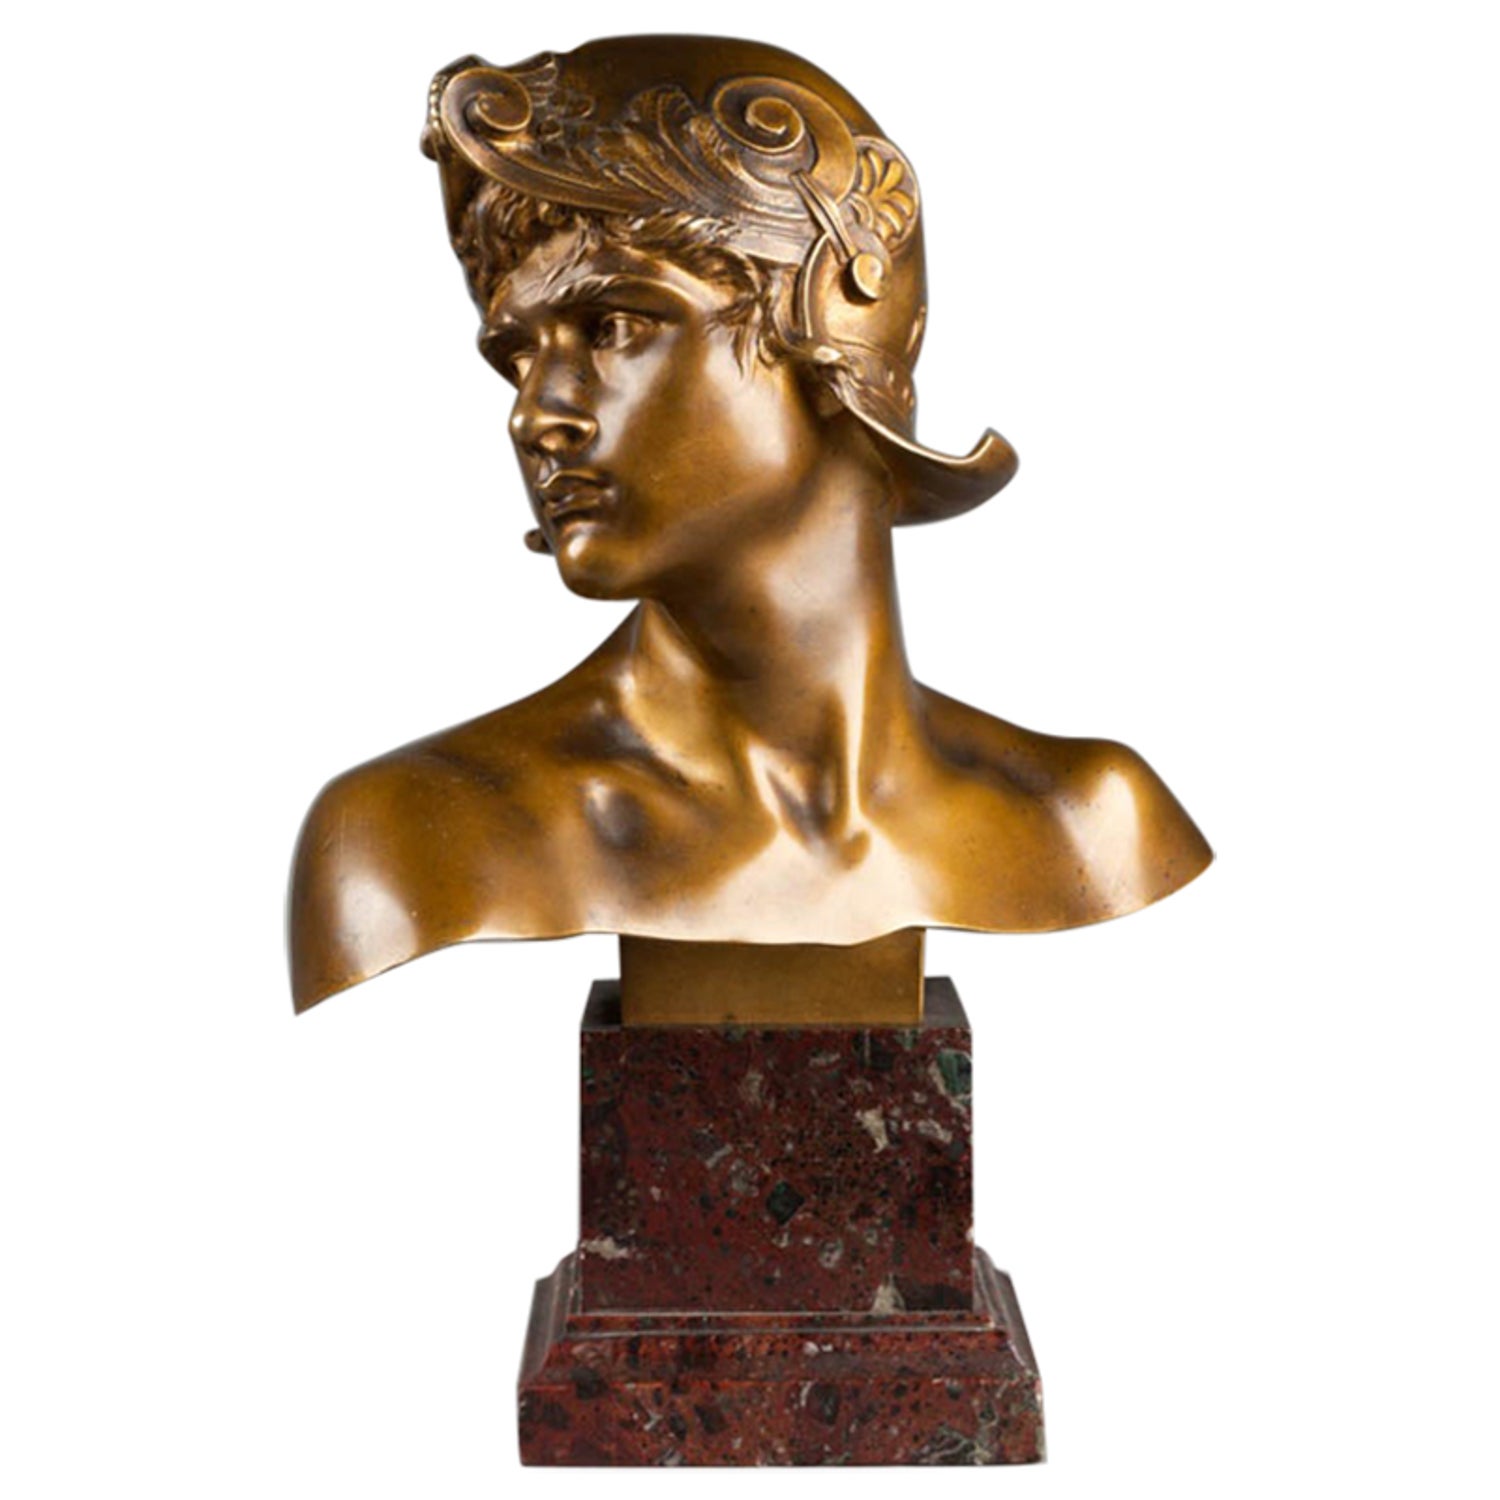 E.Hannaux, "Yound Roman Warrior", Bronze Sculpture For Sale at 1stDibs